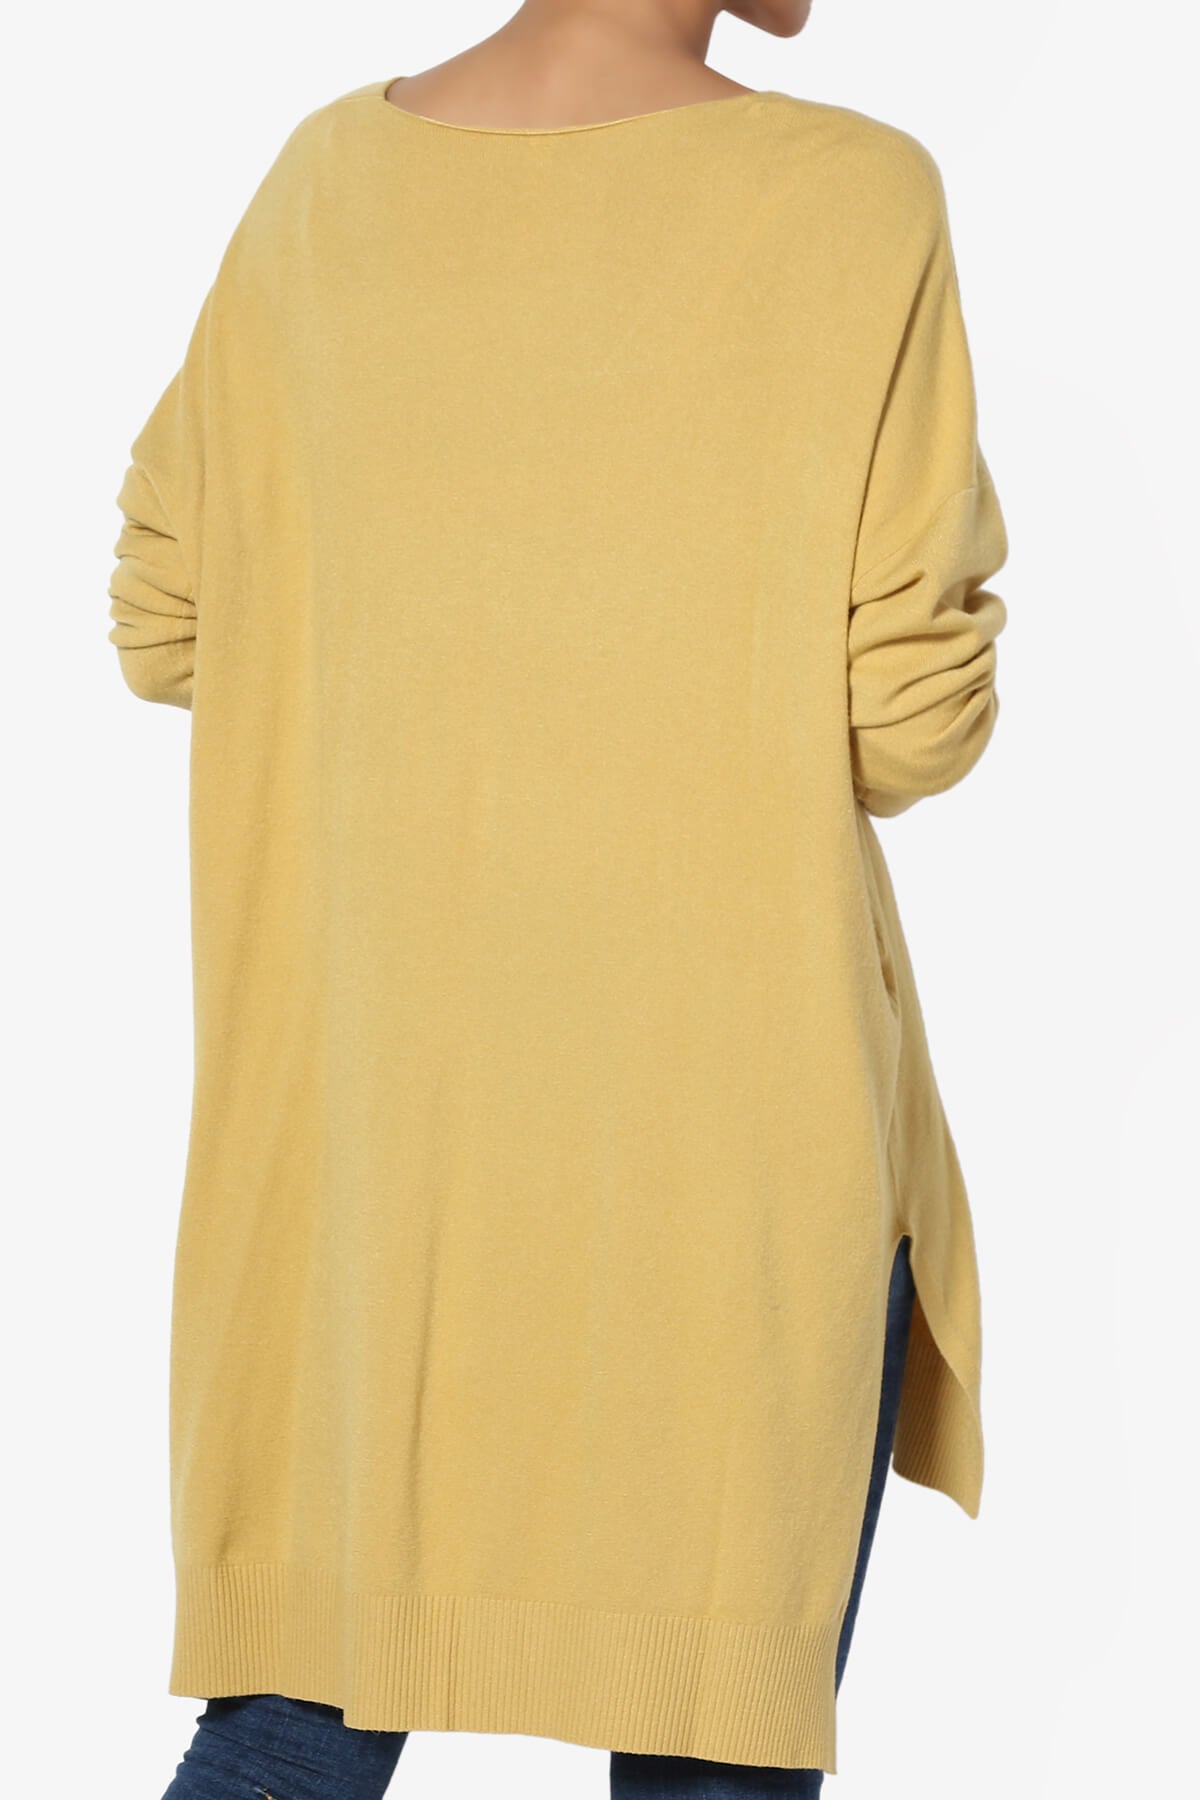 Load image into Gallery viewer, Katana Front Seam V-Neck Knit Sweater LIGHT MUSTARD_2
